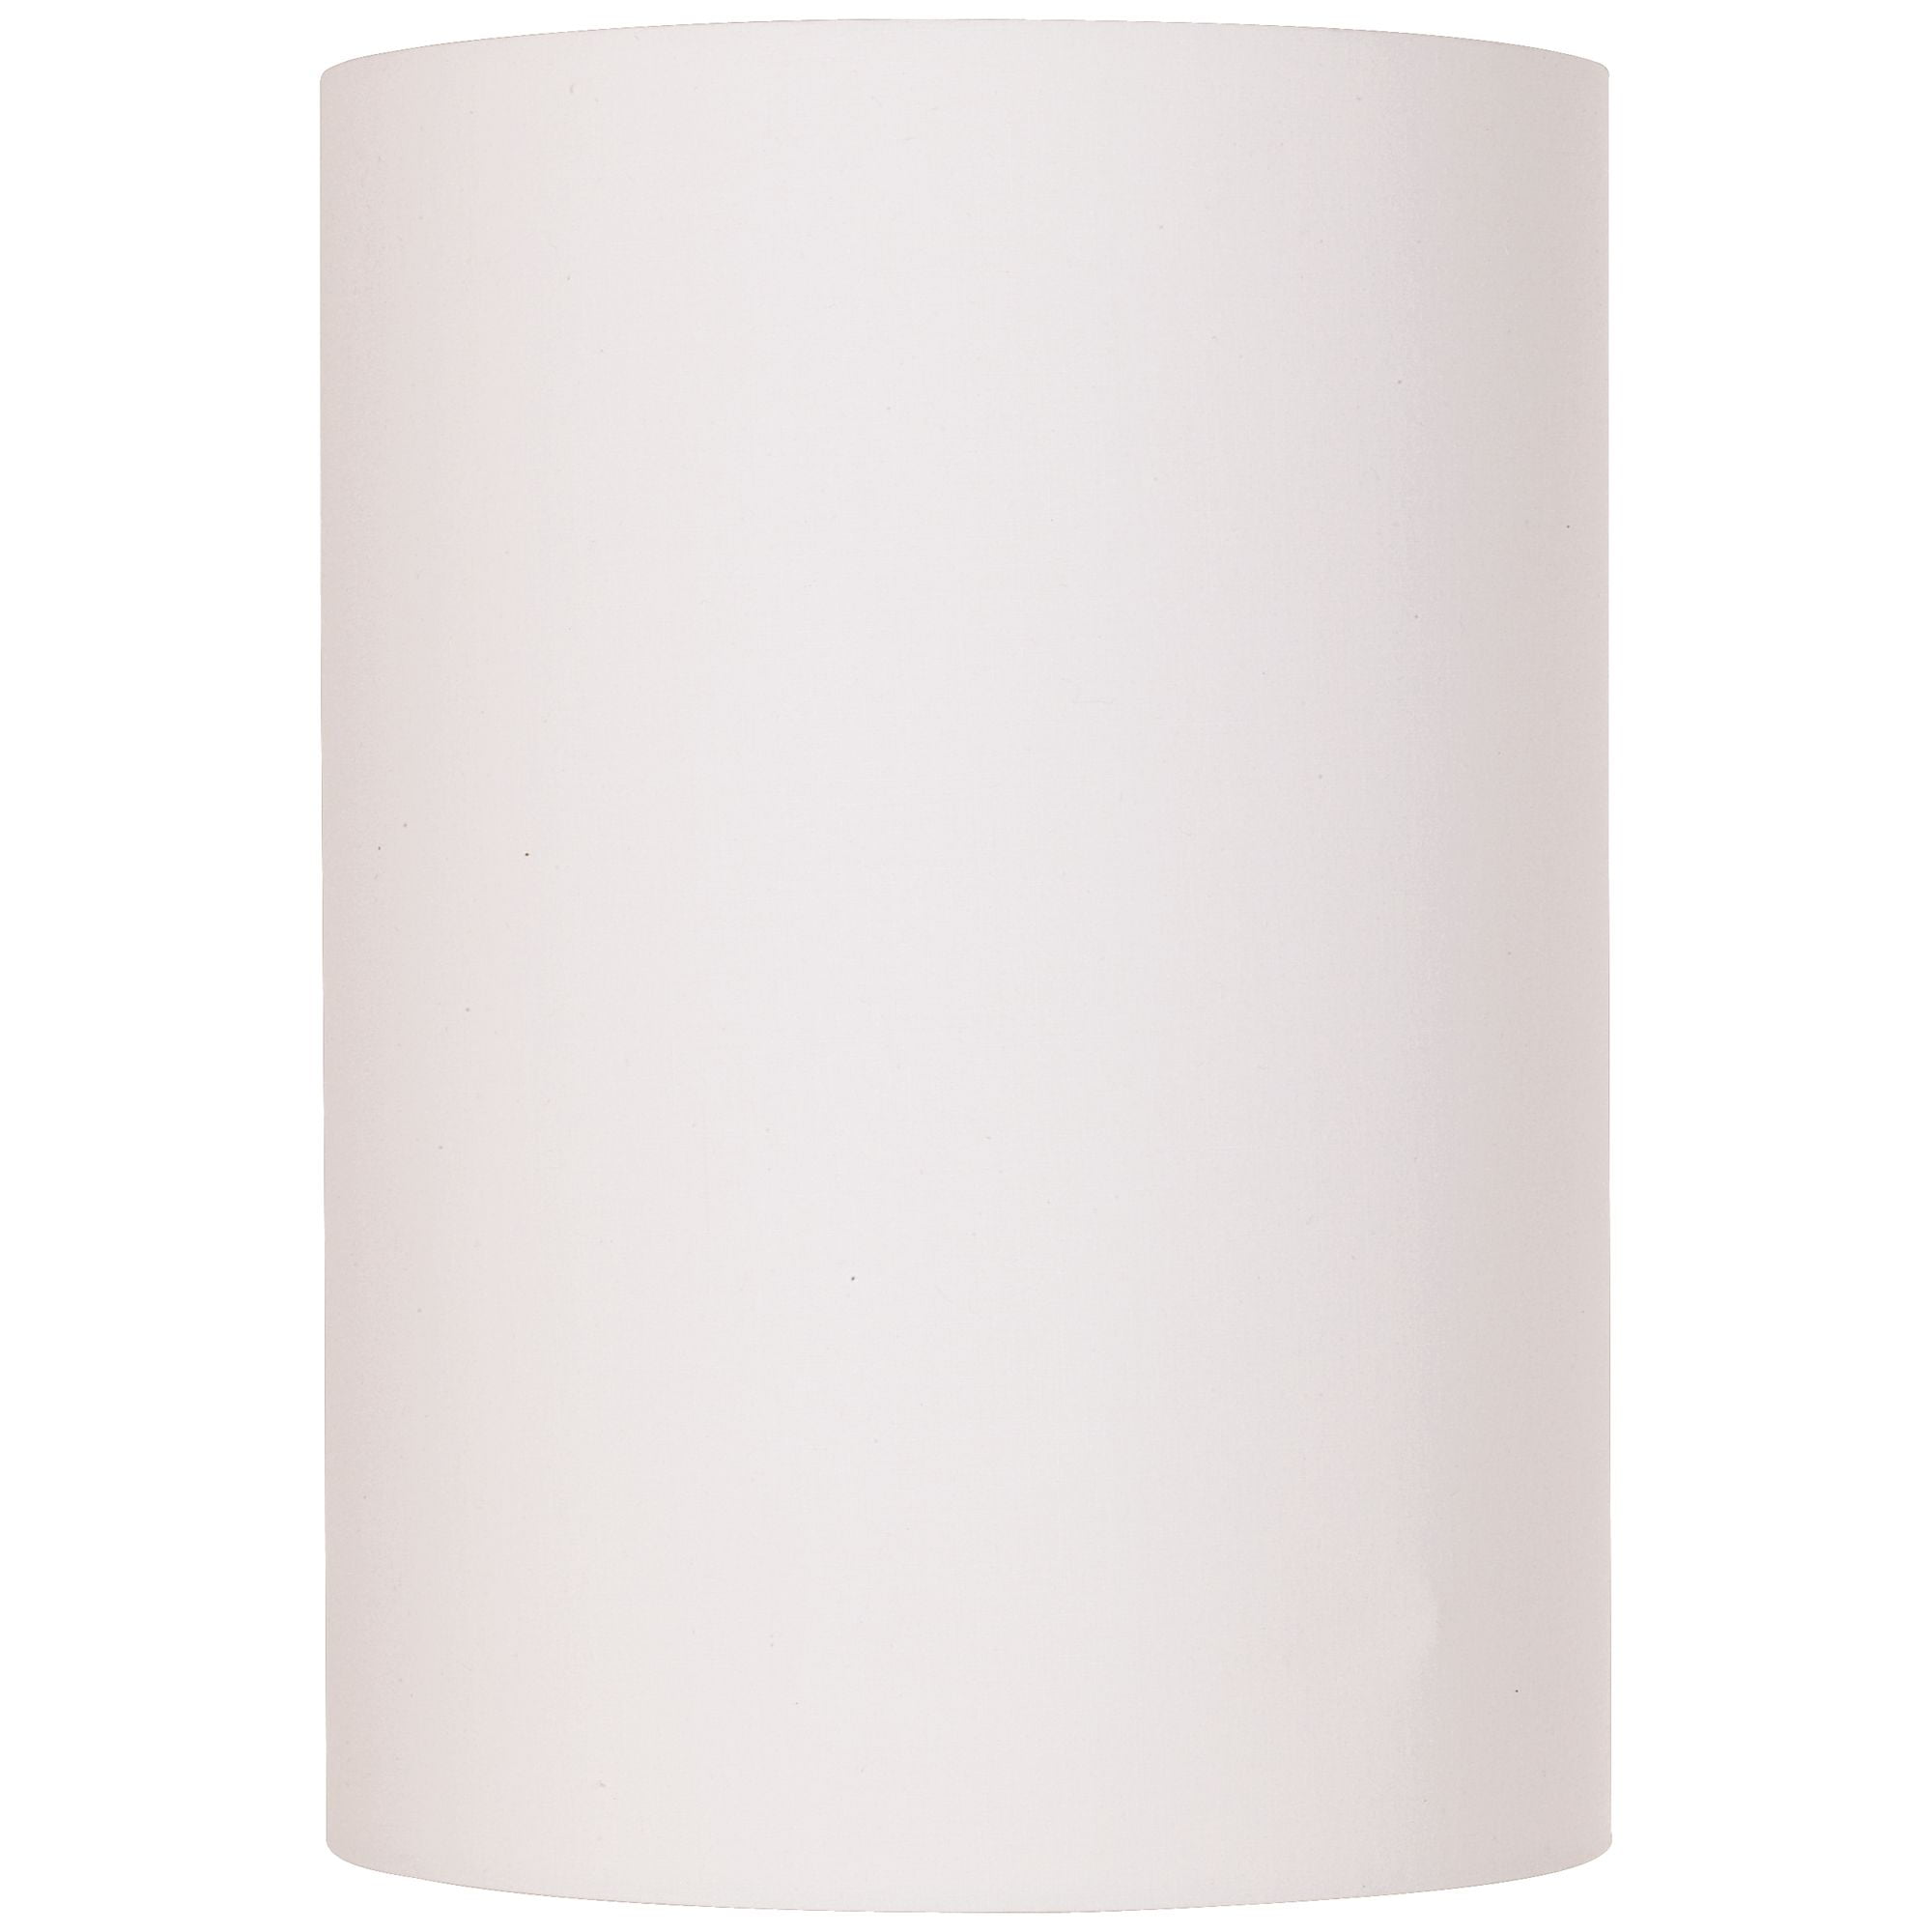 Bwood White Cotton Small Drum, Narrow Drum Lamp Shades